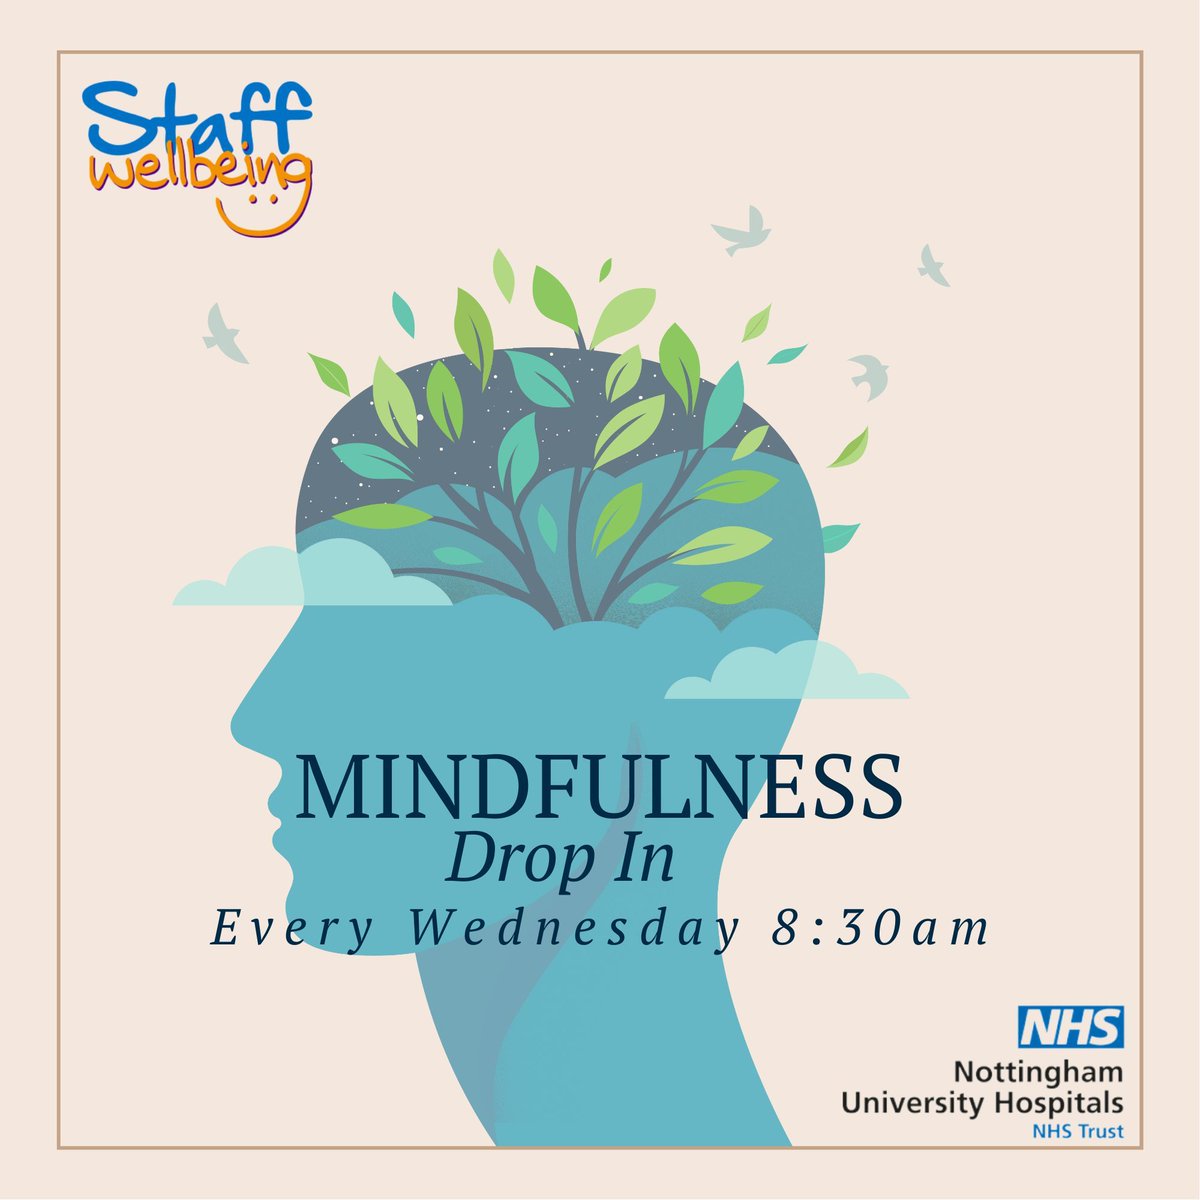 We have a new mindfulness drop in every Wednesday morning at 8:30am, come along and enjoy 20 minutes of mindfulness to start off the day, no booking required. Click the link to join: buff.ly/3TReTWn